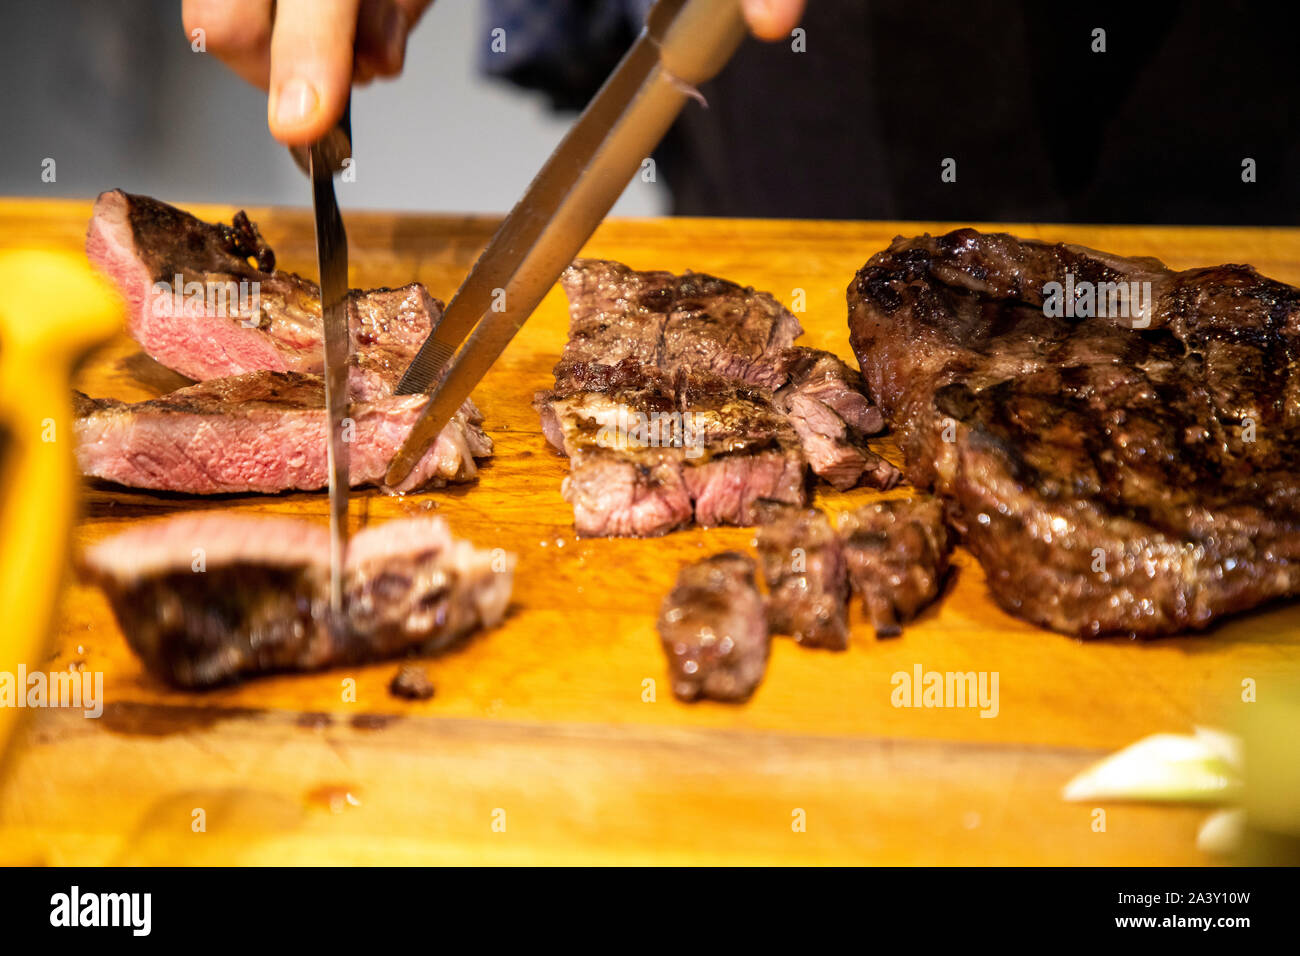 Grilled meat, beef, is cut in portions by the cook, Stock Photo